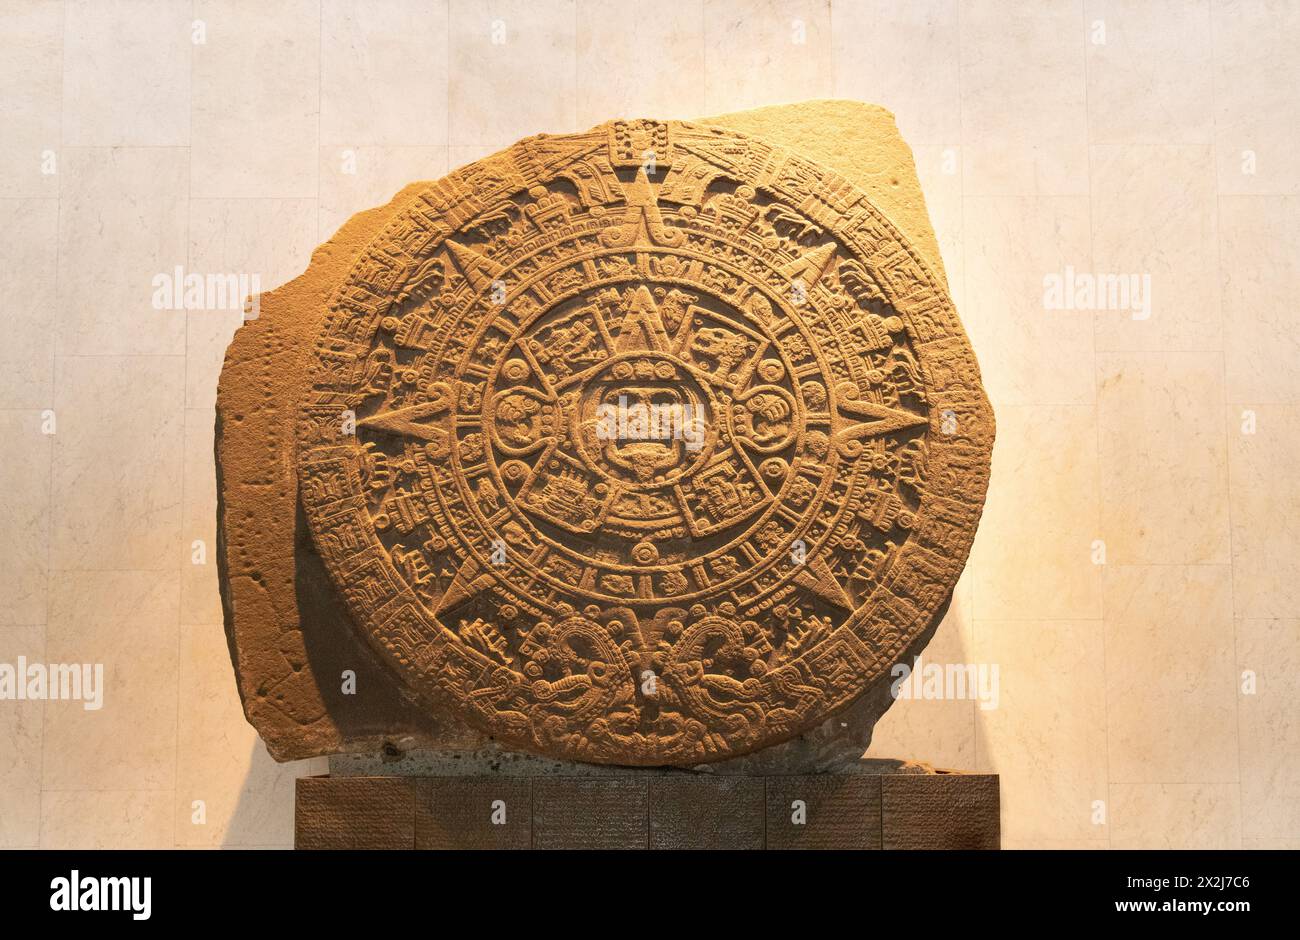 The Aztec Sun Stone or Aztec Calendar, early 1500s, Mexica mesoamerica sculpture by the Aztecs, now in the Museum of Anthropology, Mexico City, Mexico Stock Photo